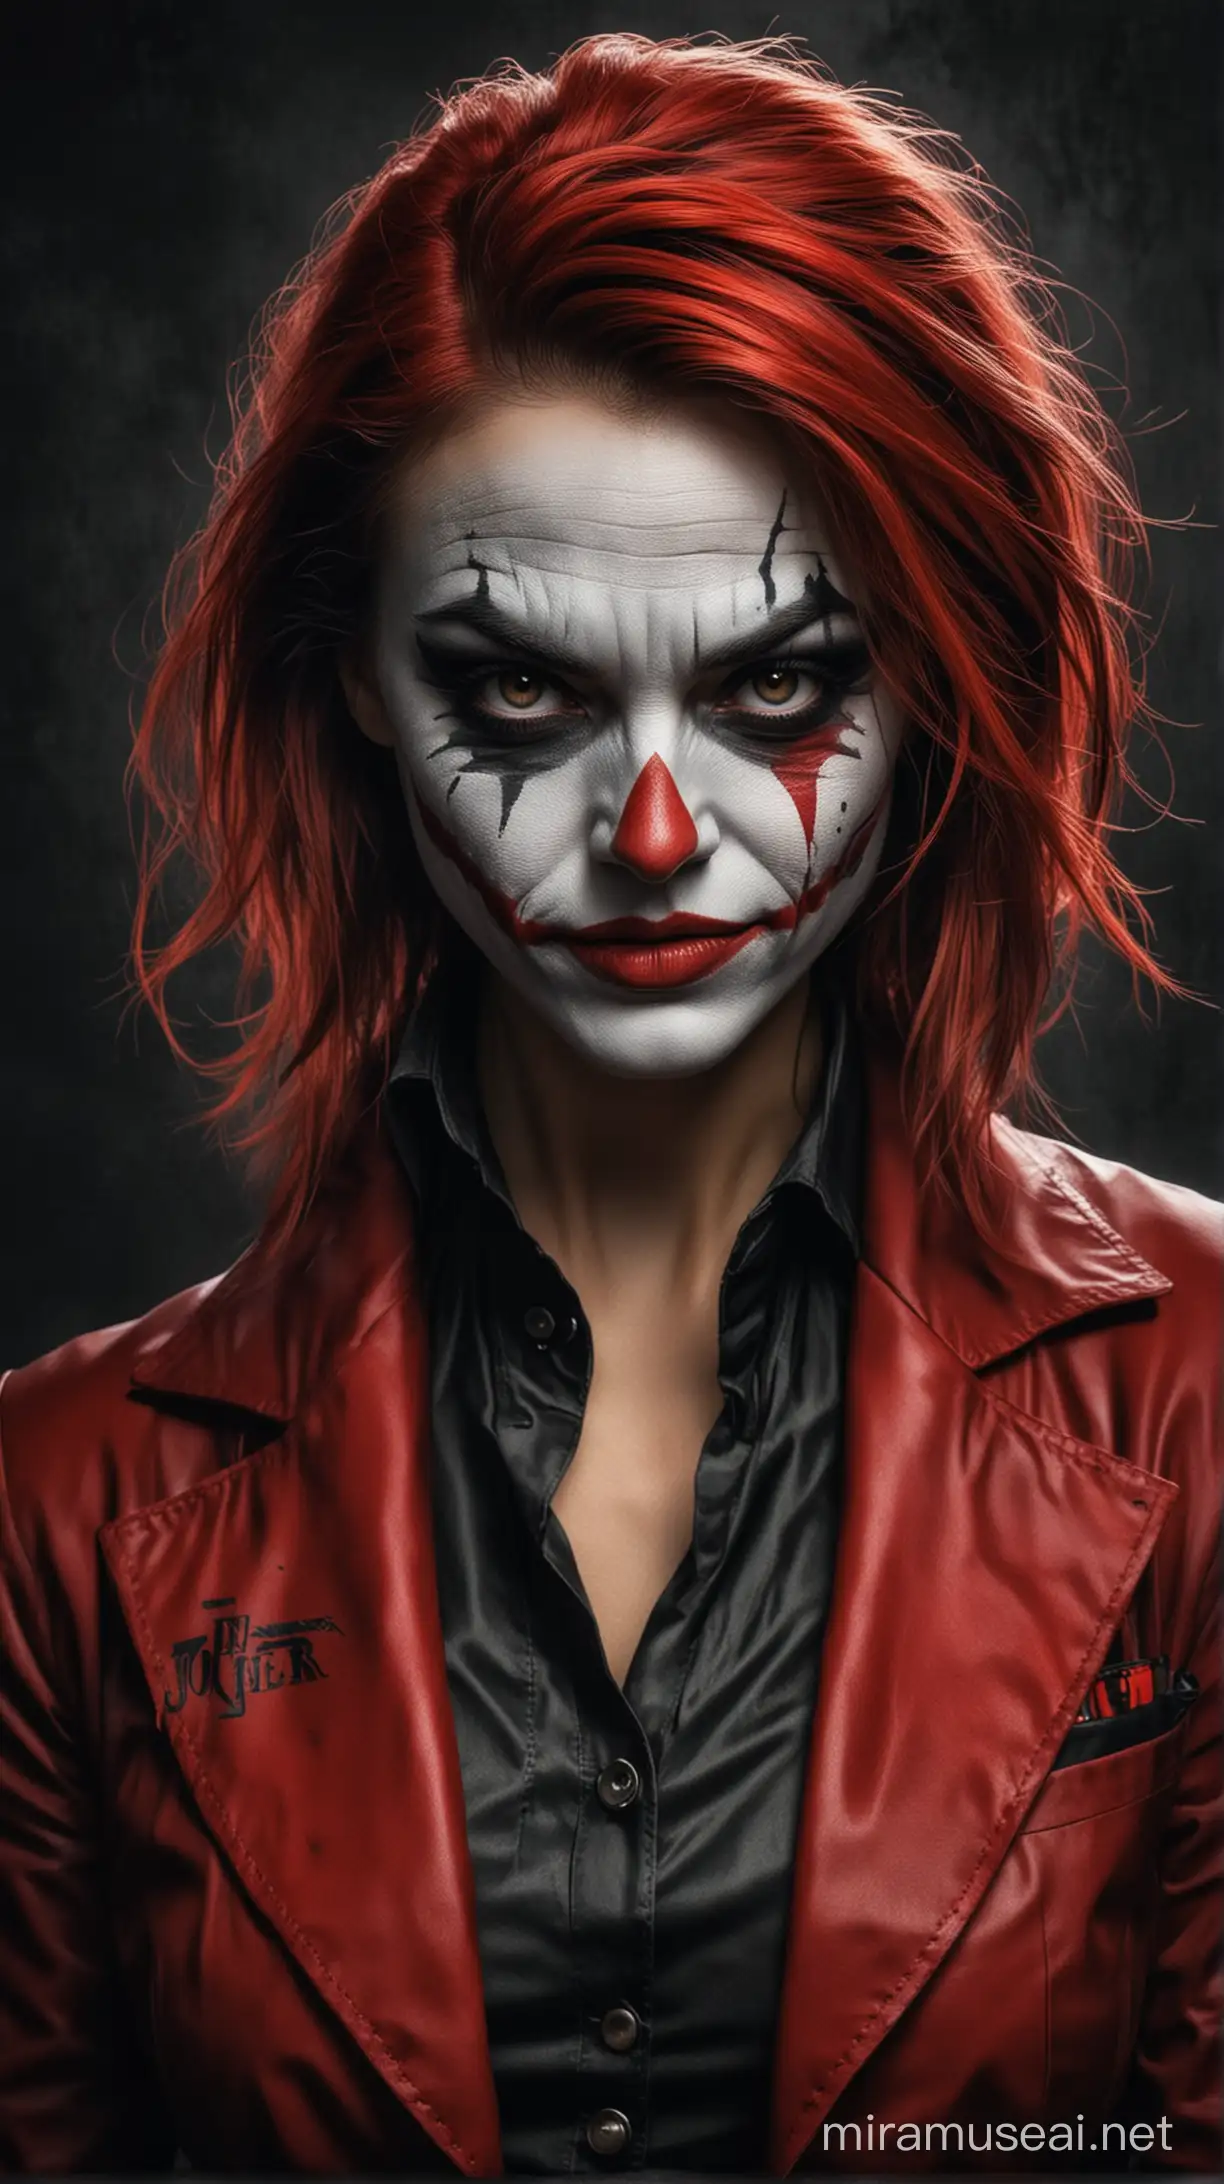 Female Graphic Design Doctor with JokerInspired Face in Red and Black